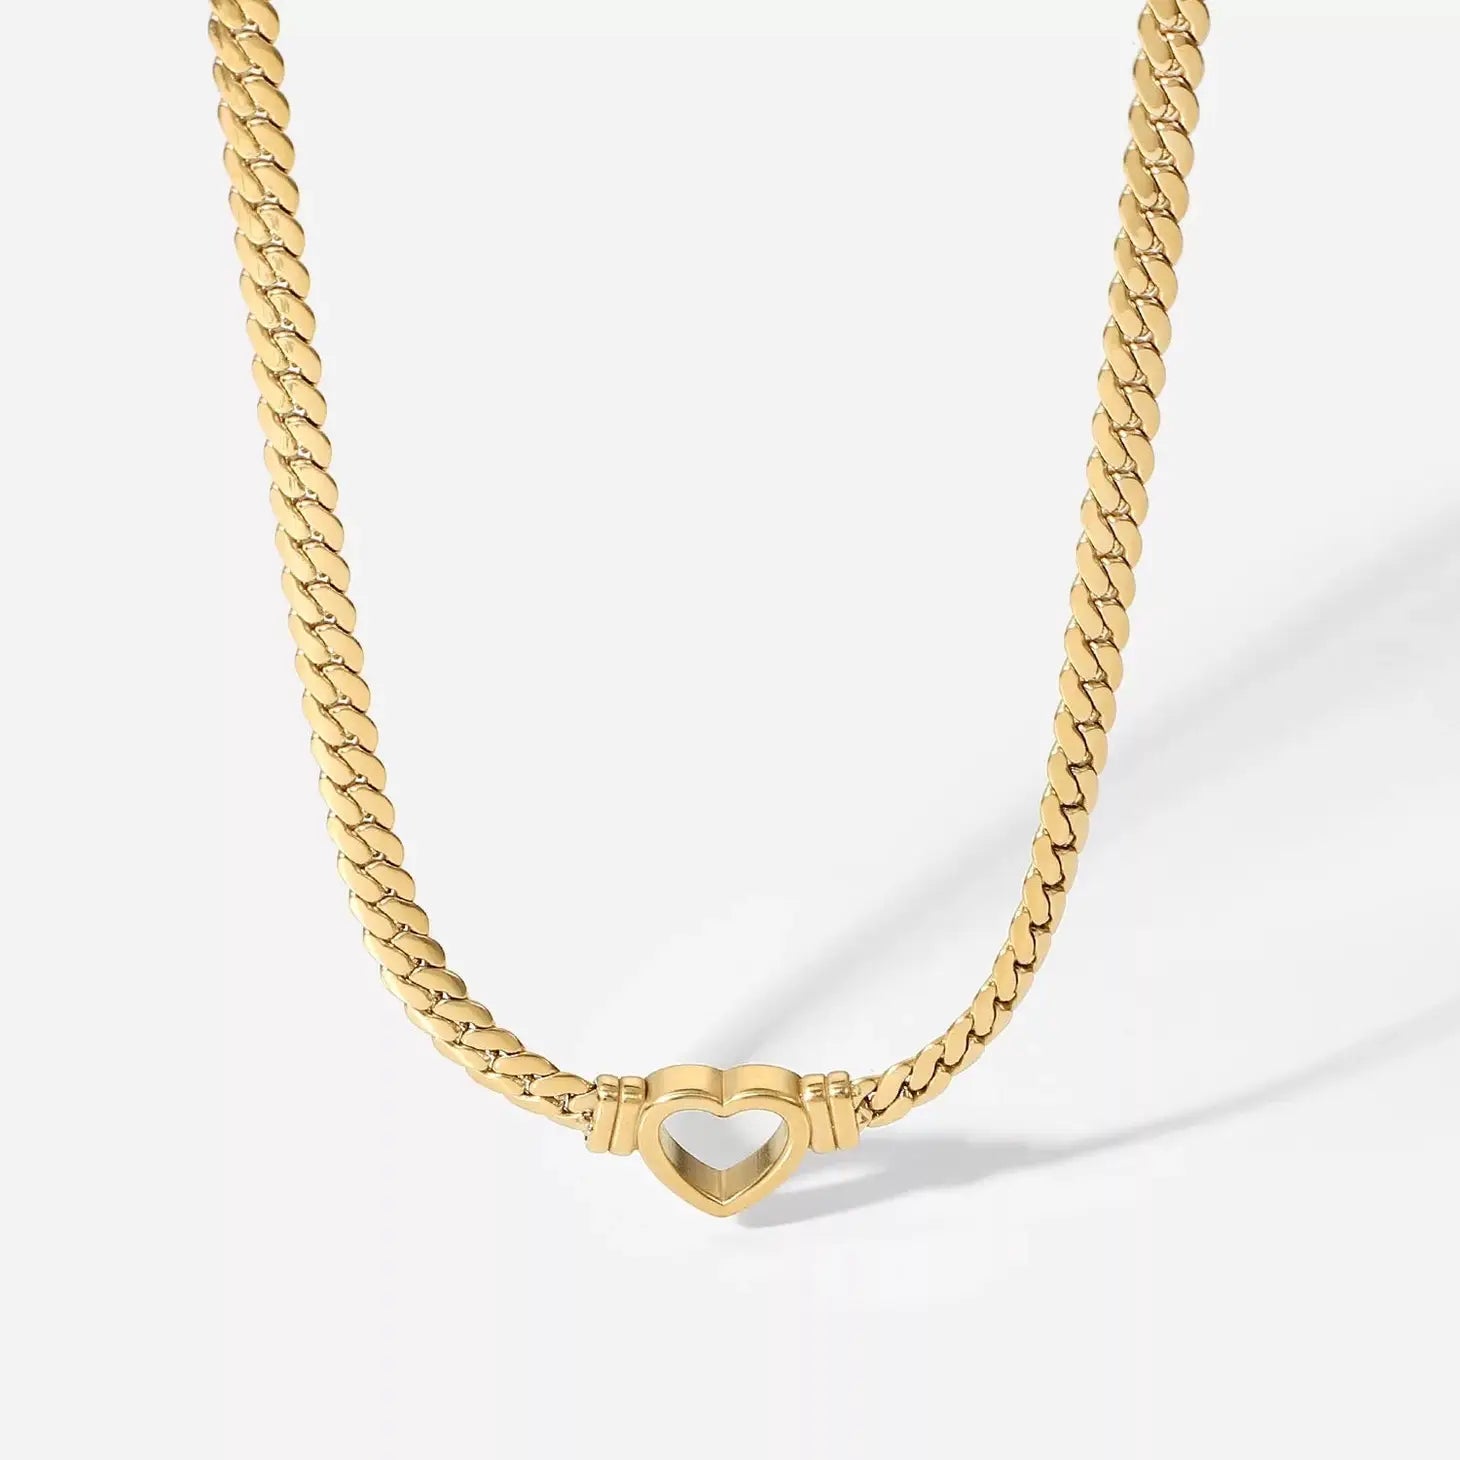 Olso Heart Necklace